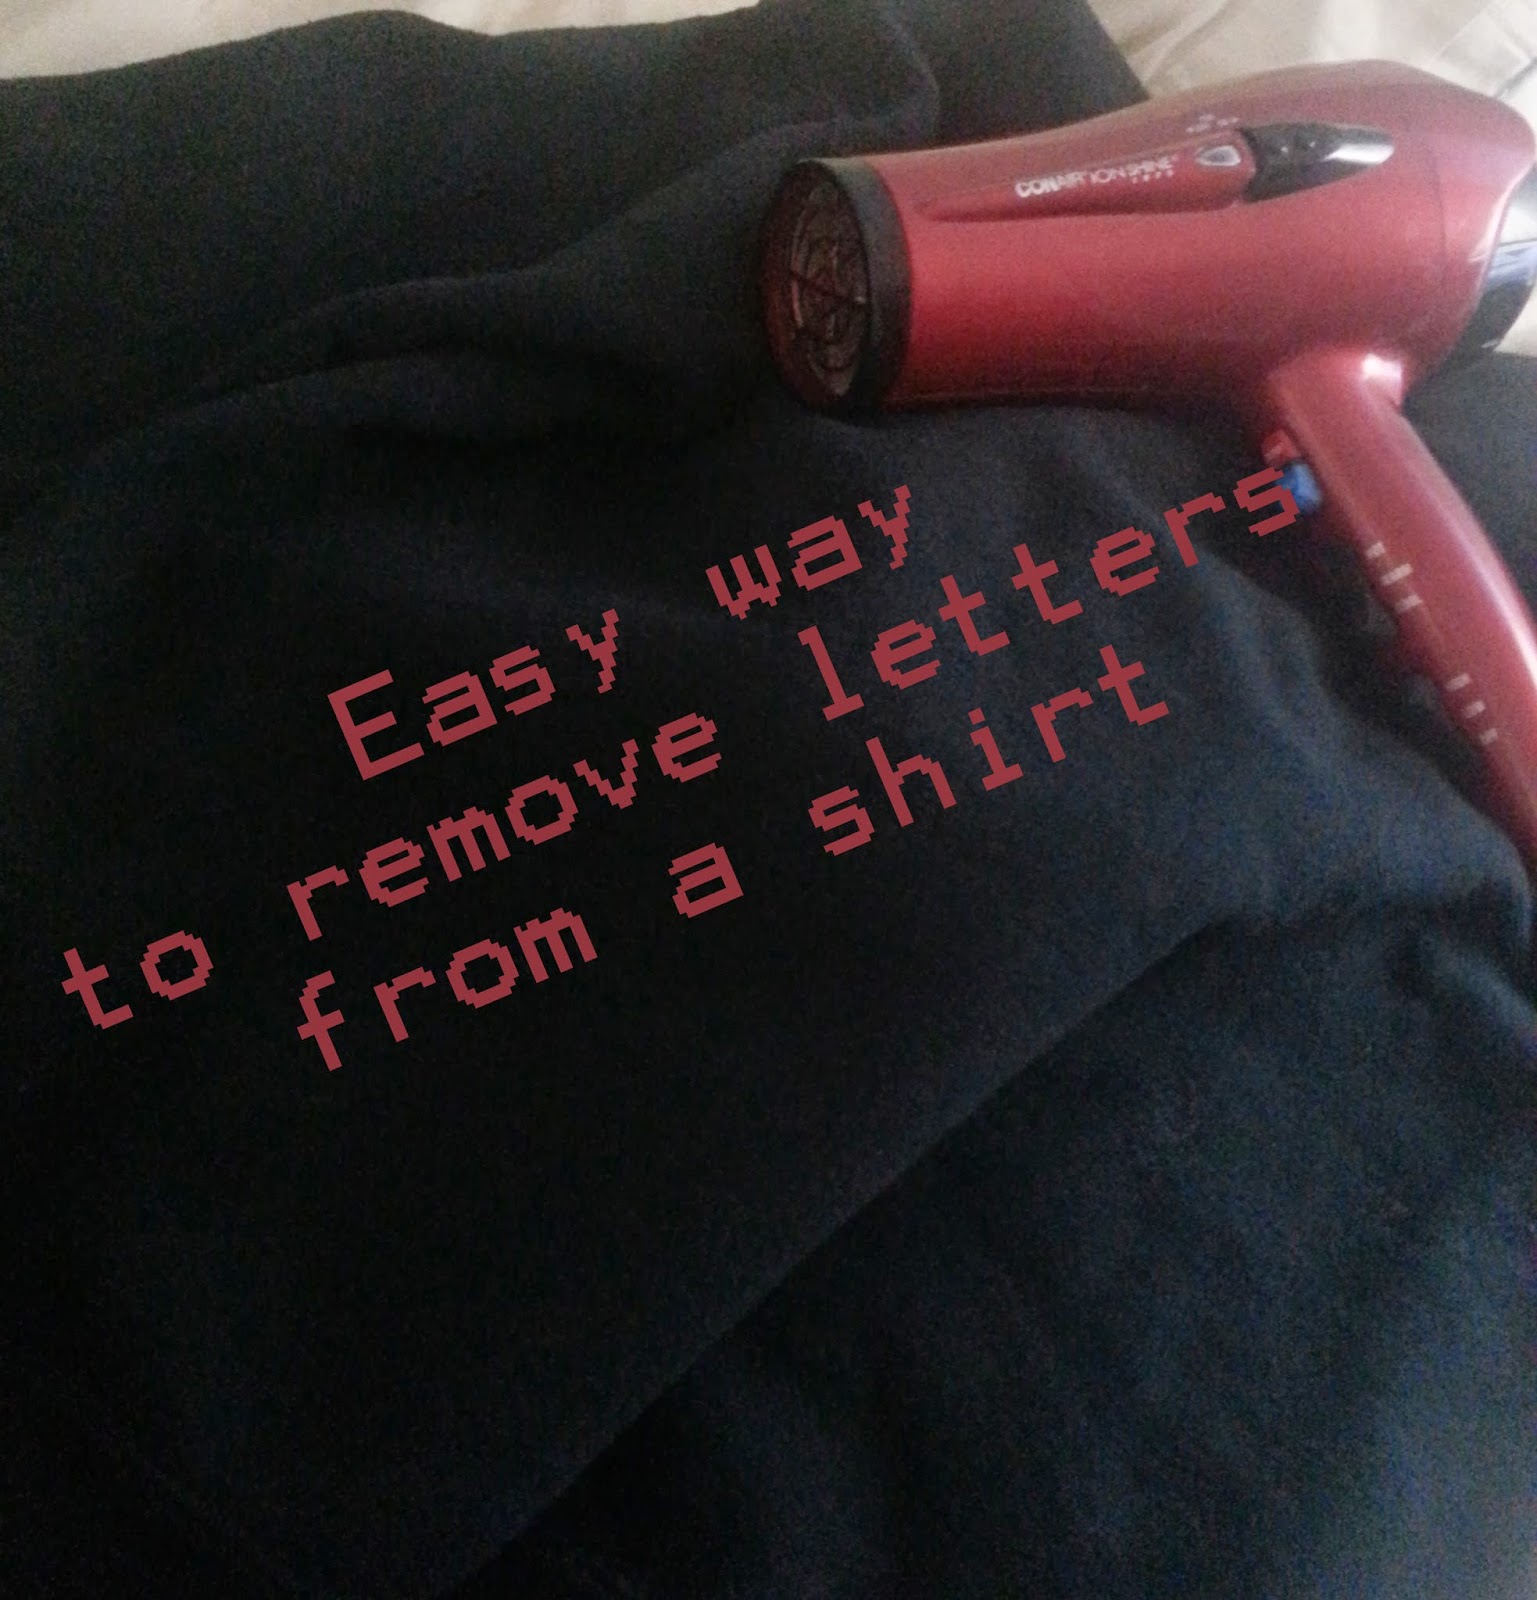 easy way to remove letters from a shirt